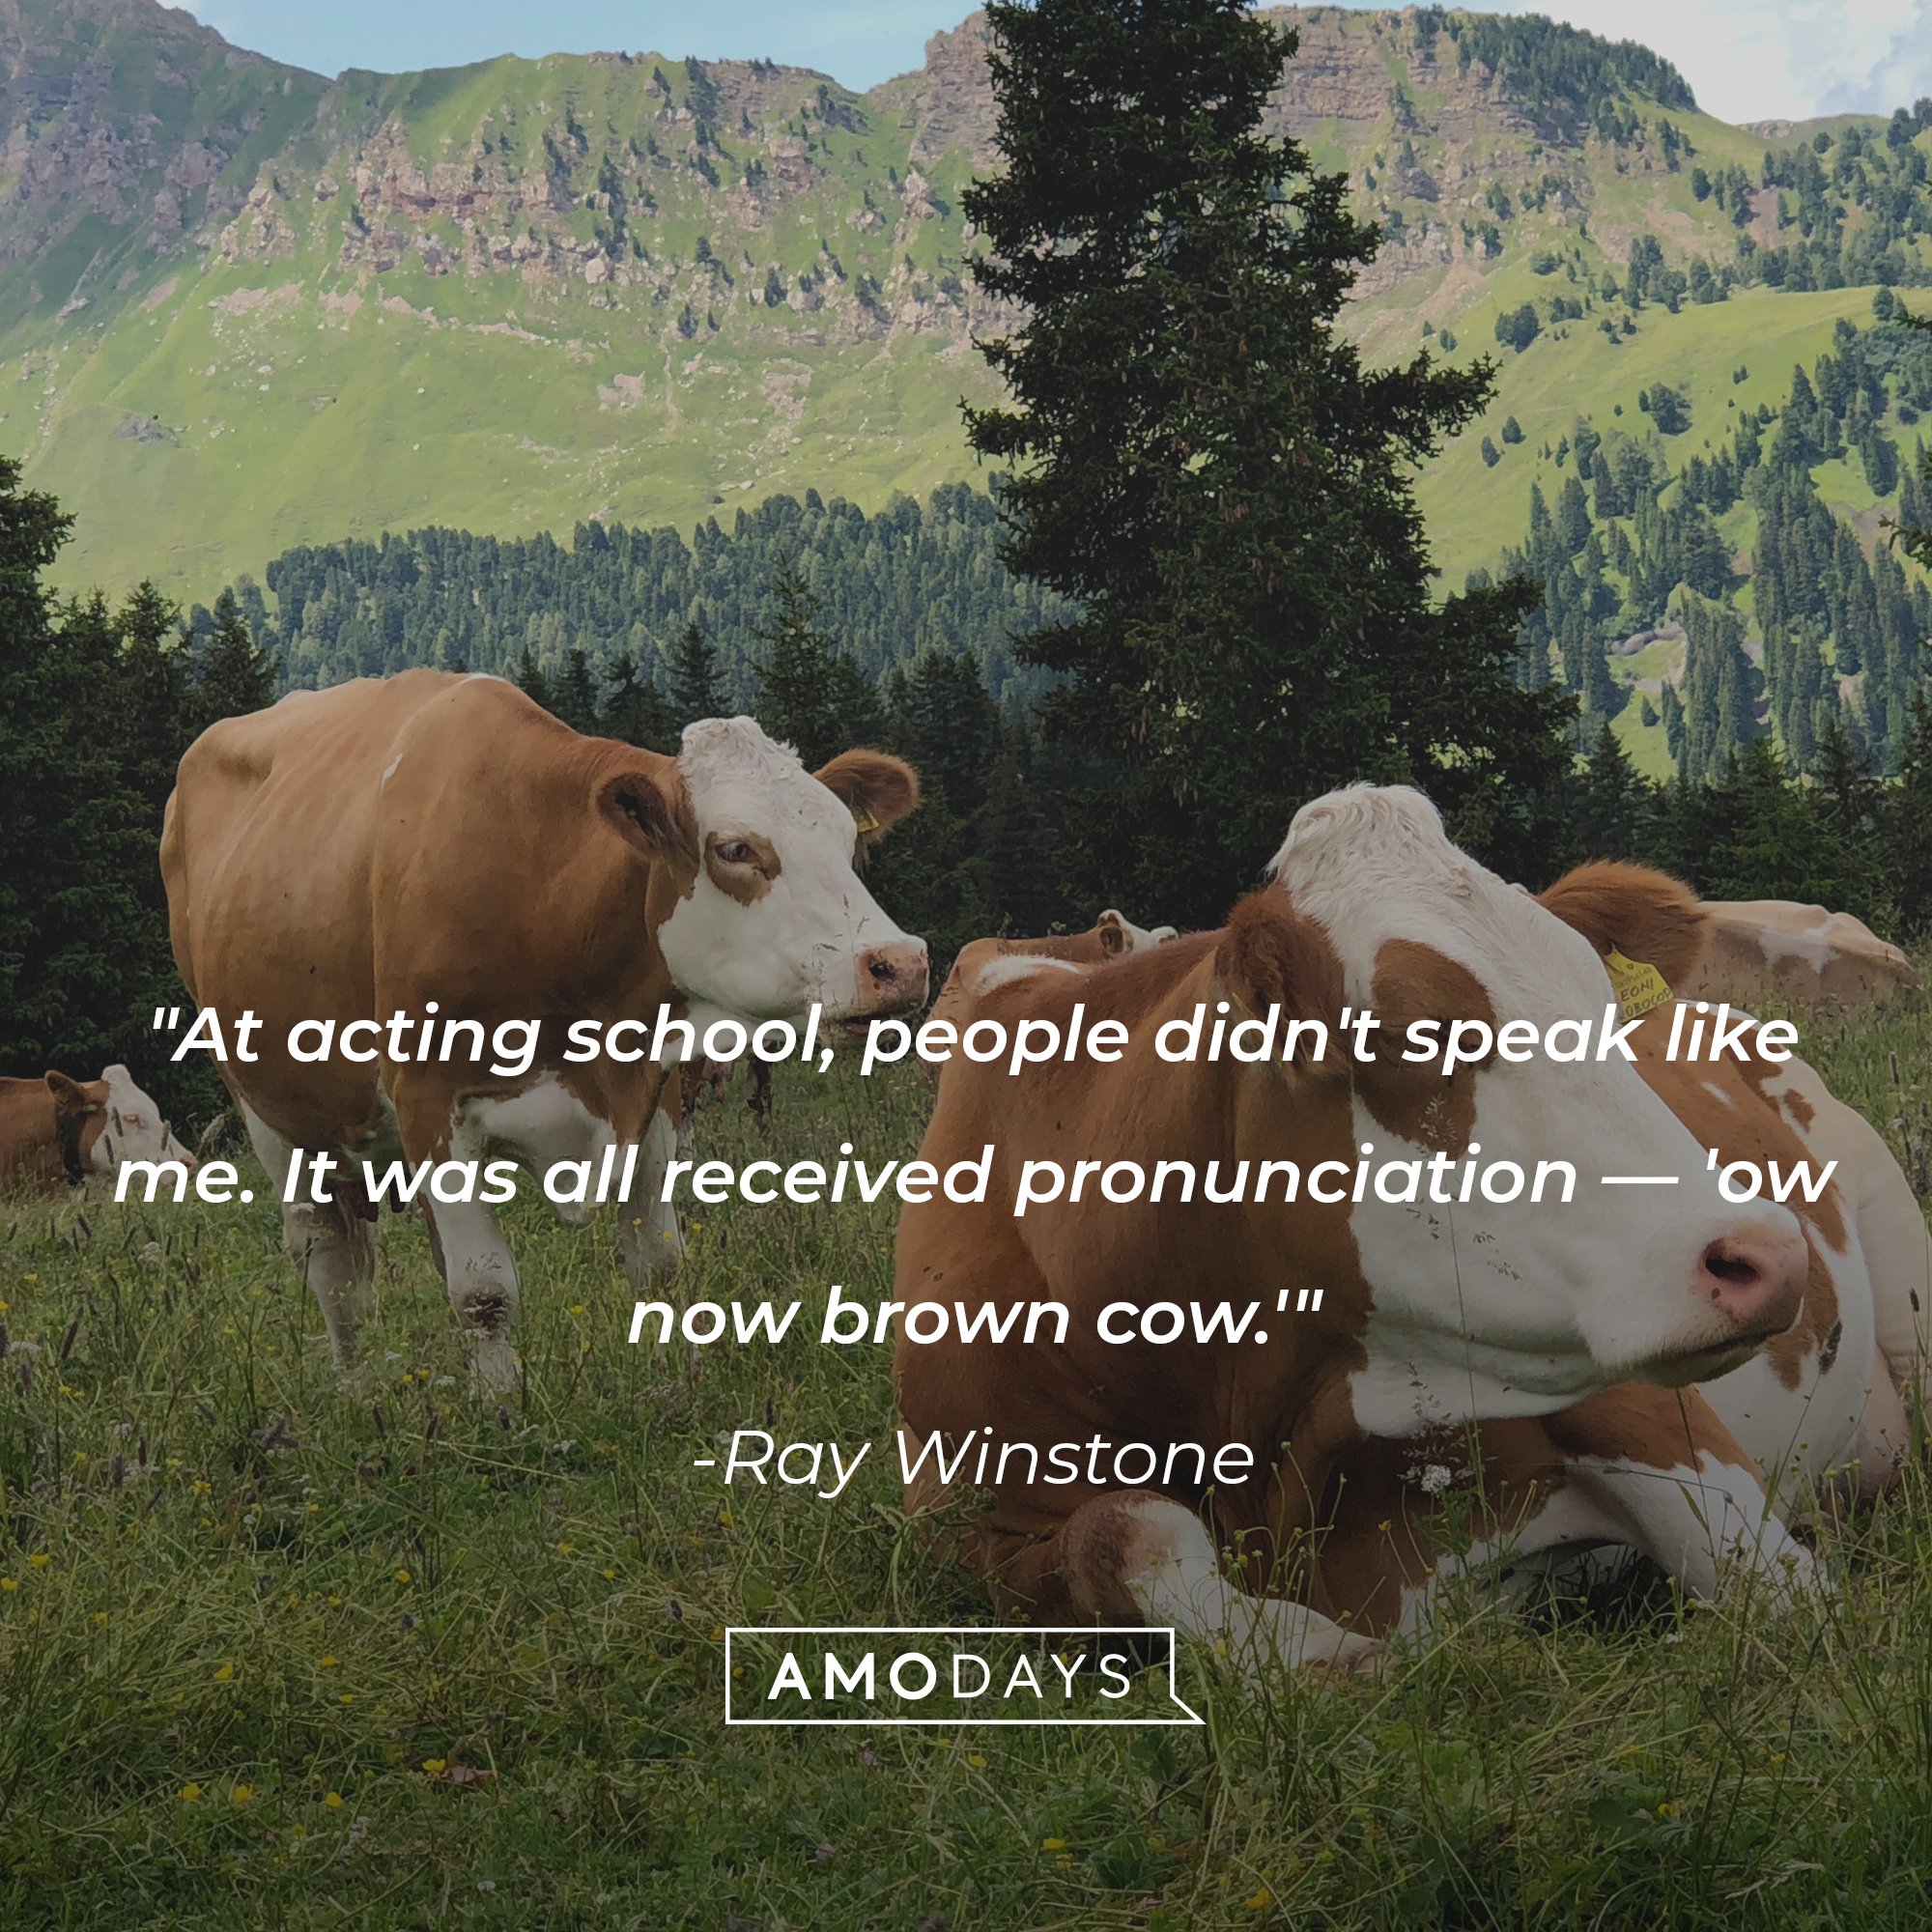  Ray Winstone’s quote: "At acting school, people didn't speak like me. It was all received pronunciation —'ow now brown cow.'" | Image: AmoDays